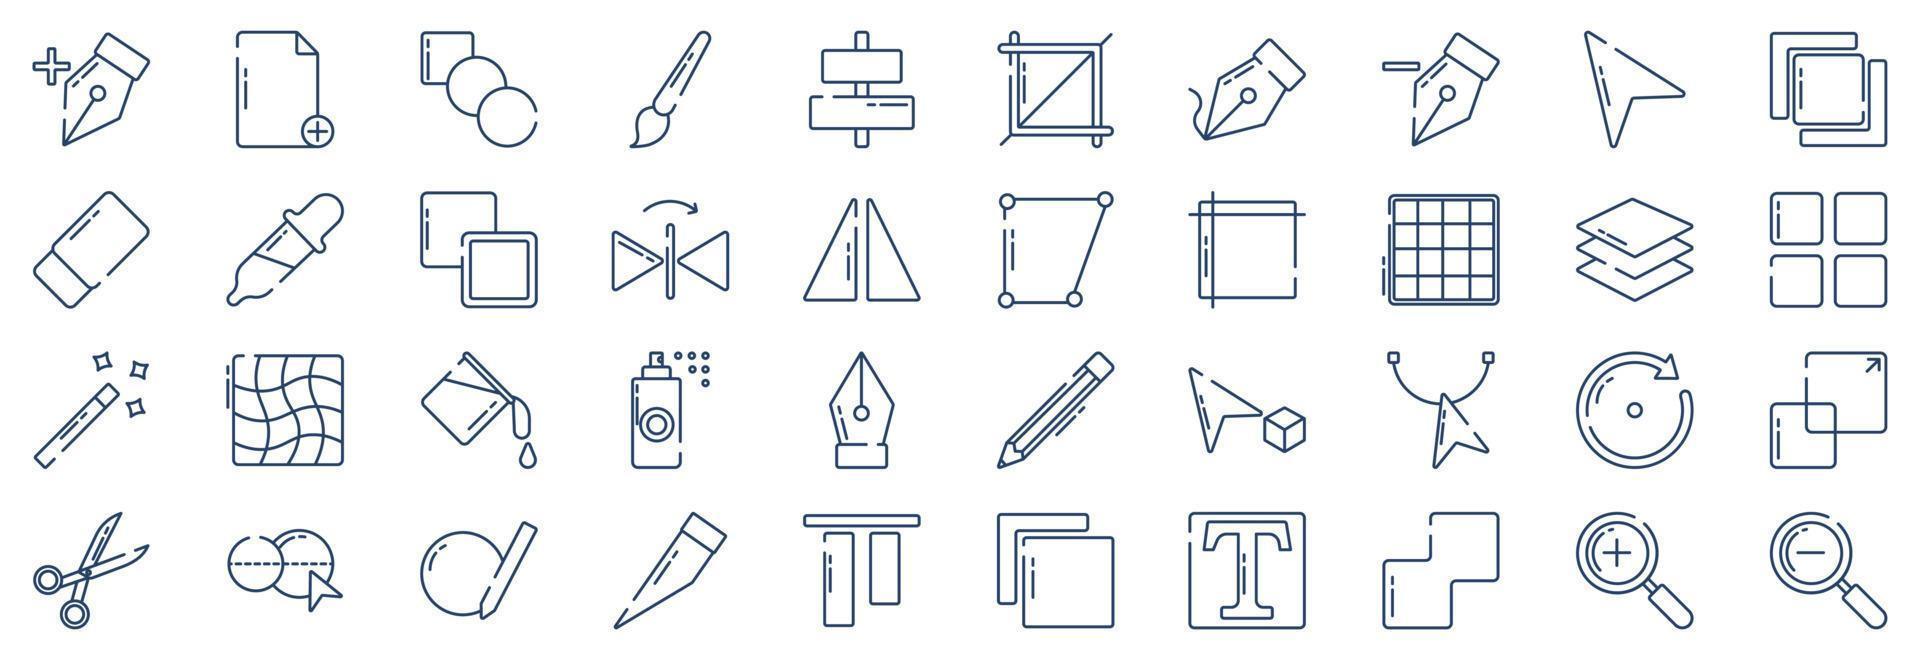 Collection of icons related to Design Tools Interface, including icons like Add Anchor Point, file, Pen, Brush and more. vector illustrations, Pixel Perfect set